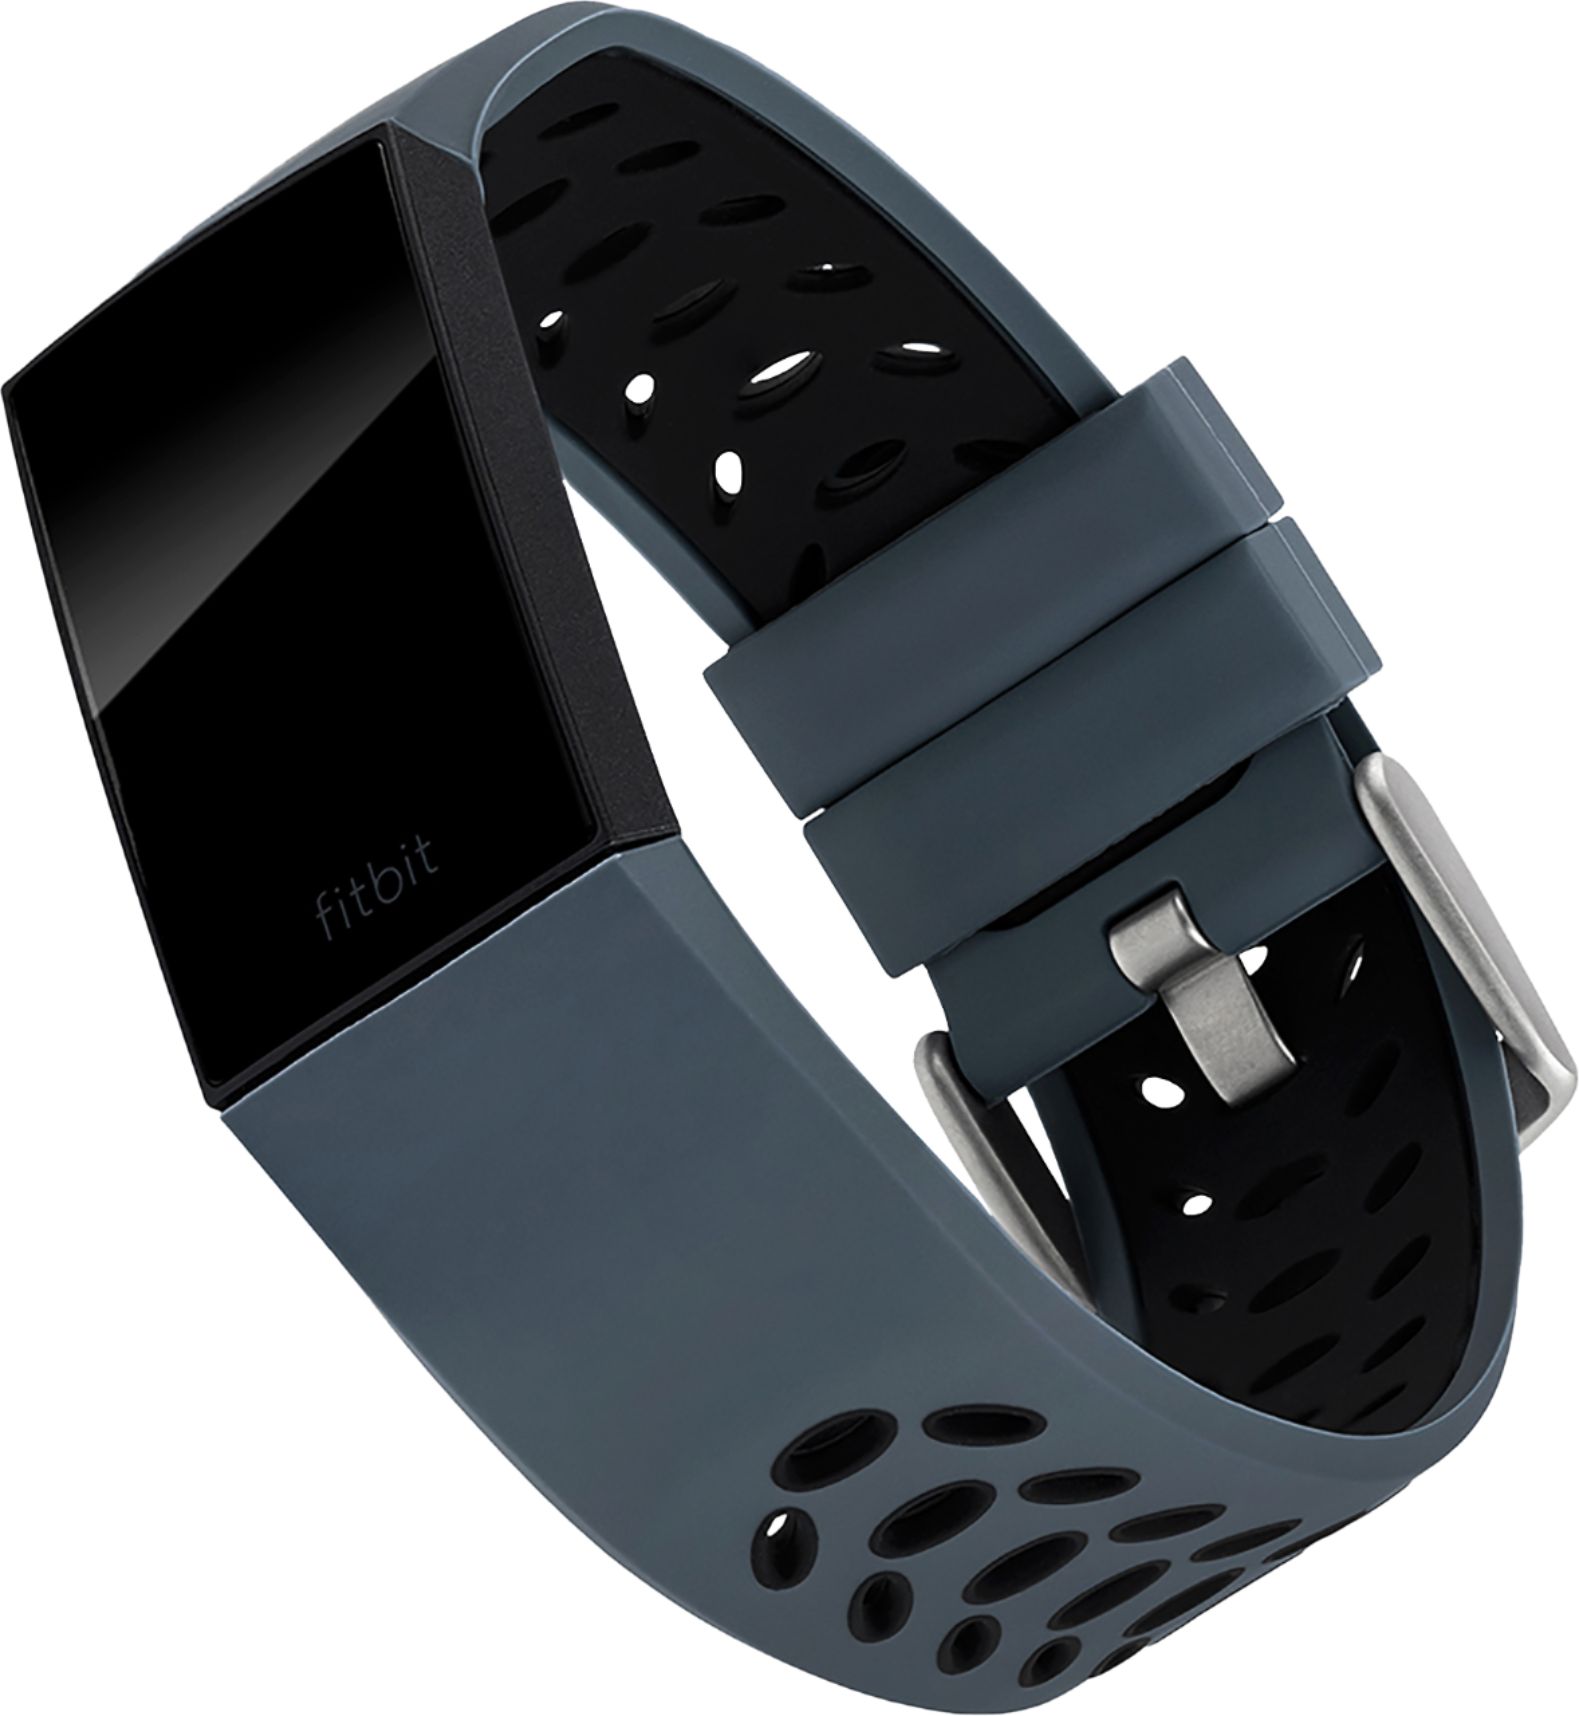 Sport Silicone Strap For Fitbit Charge 3 Bracelet Soft Wrist Belt Watch  Strap For Fitbit Charge 3 Band Replacement Accessories From Ivylovme, $1.81